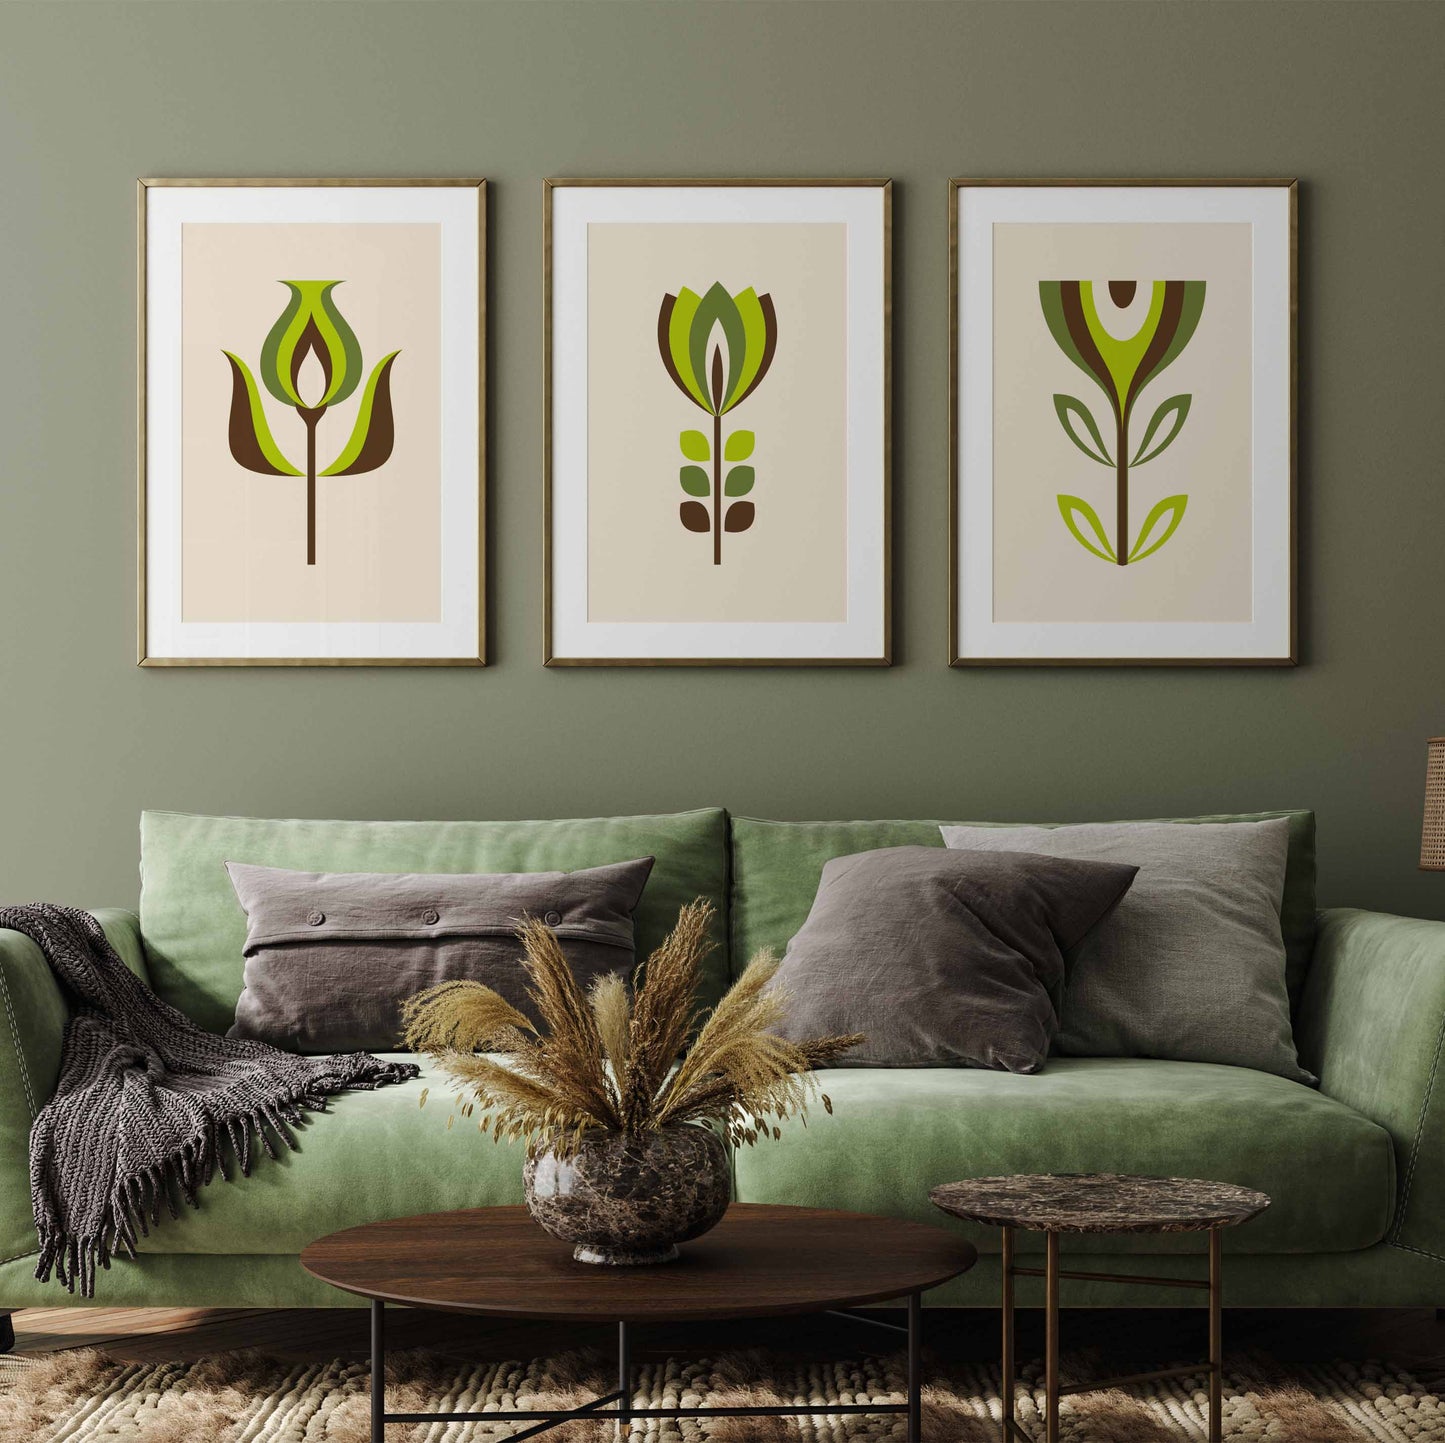 Set of green flower prints with a mid century modern style design